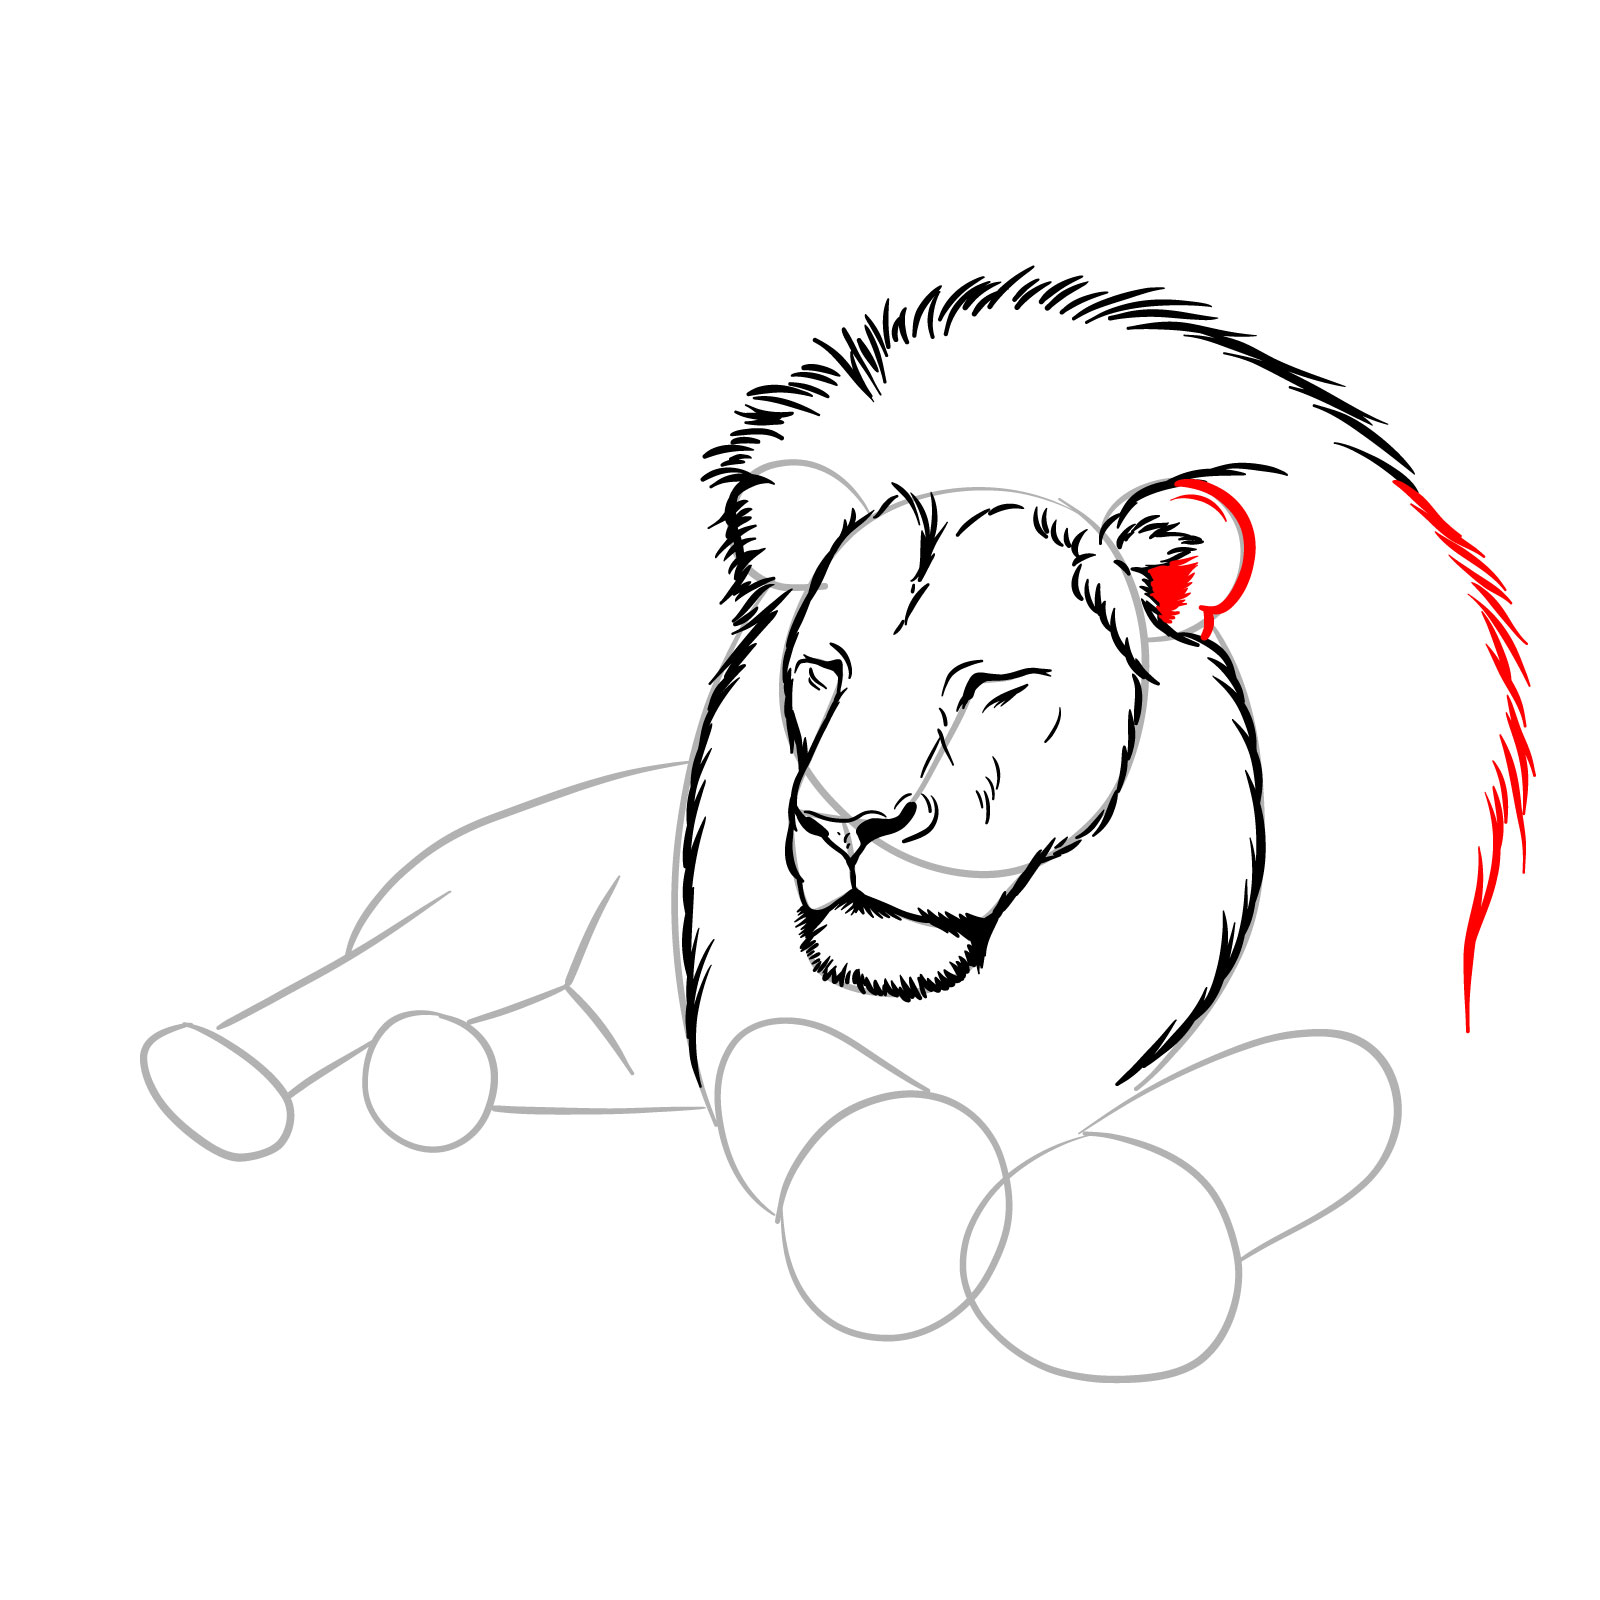 How to draw a sleeping lion in front view - Step 7: Ear and mane enhancements